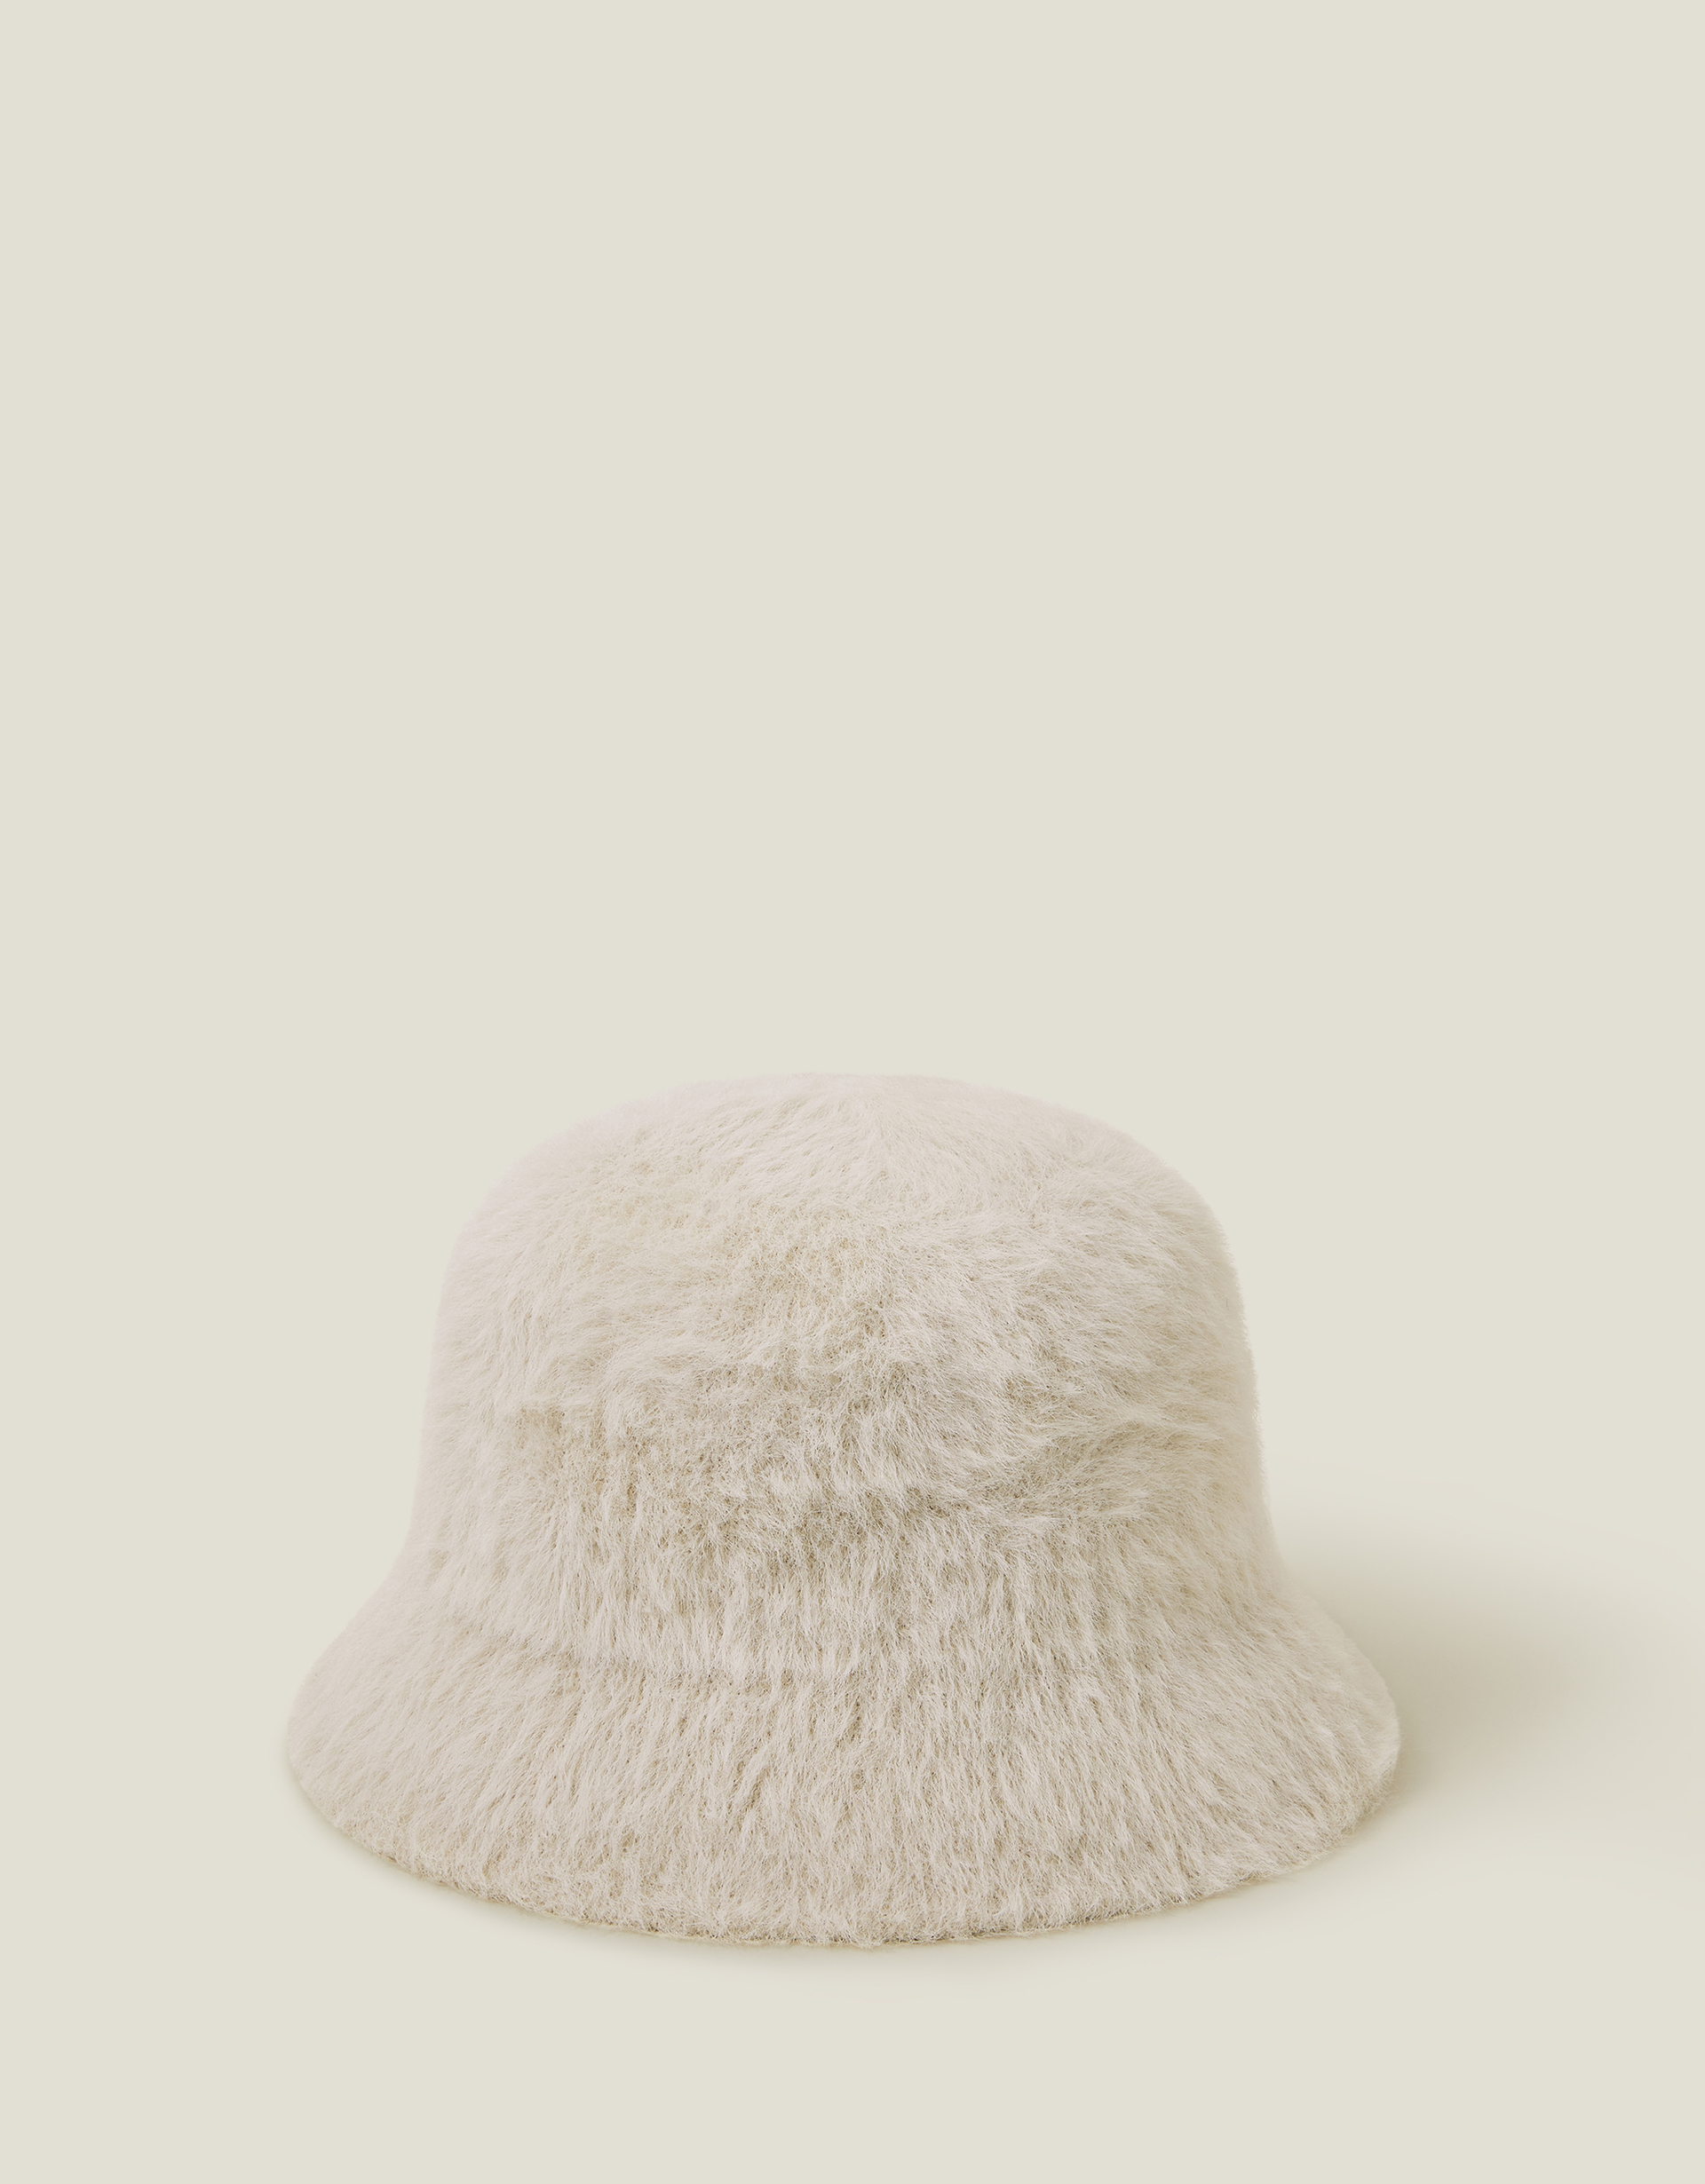 Accessorize Women's Fluffy Bucket Hat Natural, Size: One Size